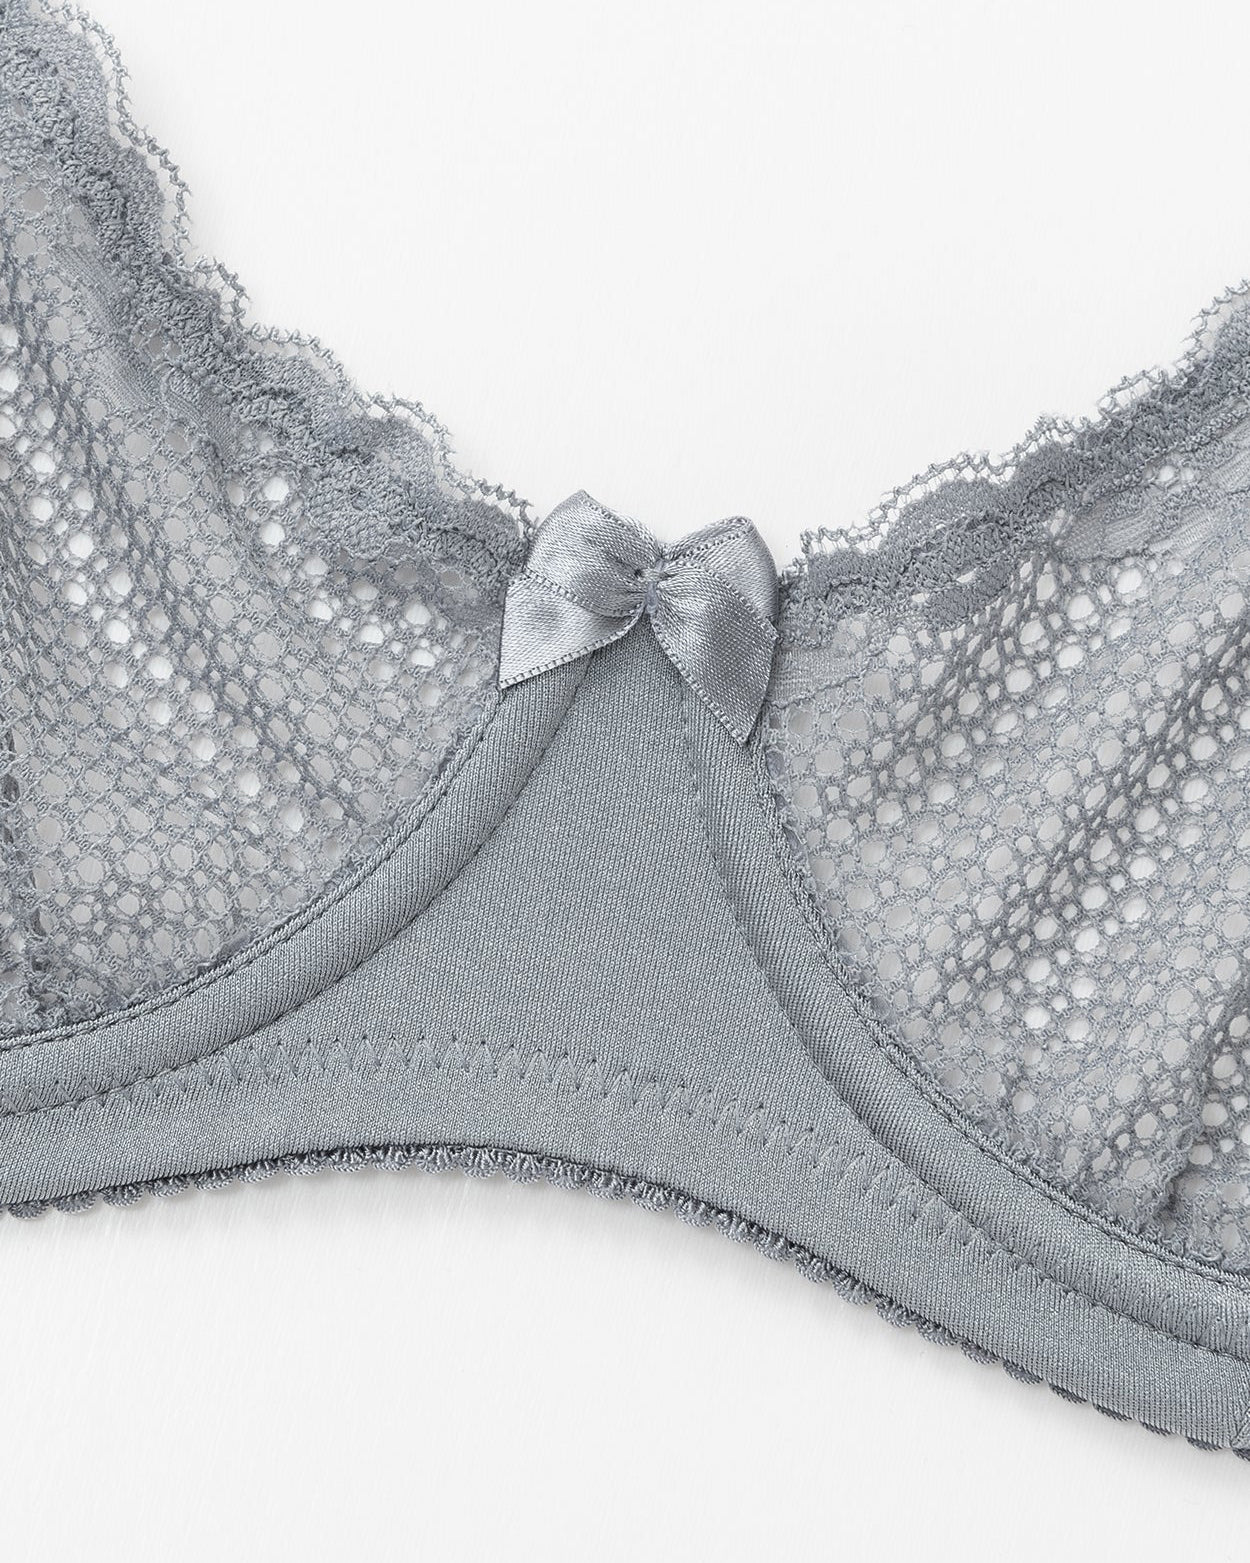 Unlined See Through 1/2 Cup Mesh Demi Shelf Underwired Bra White